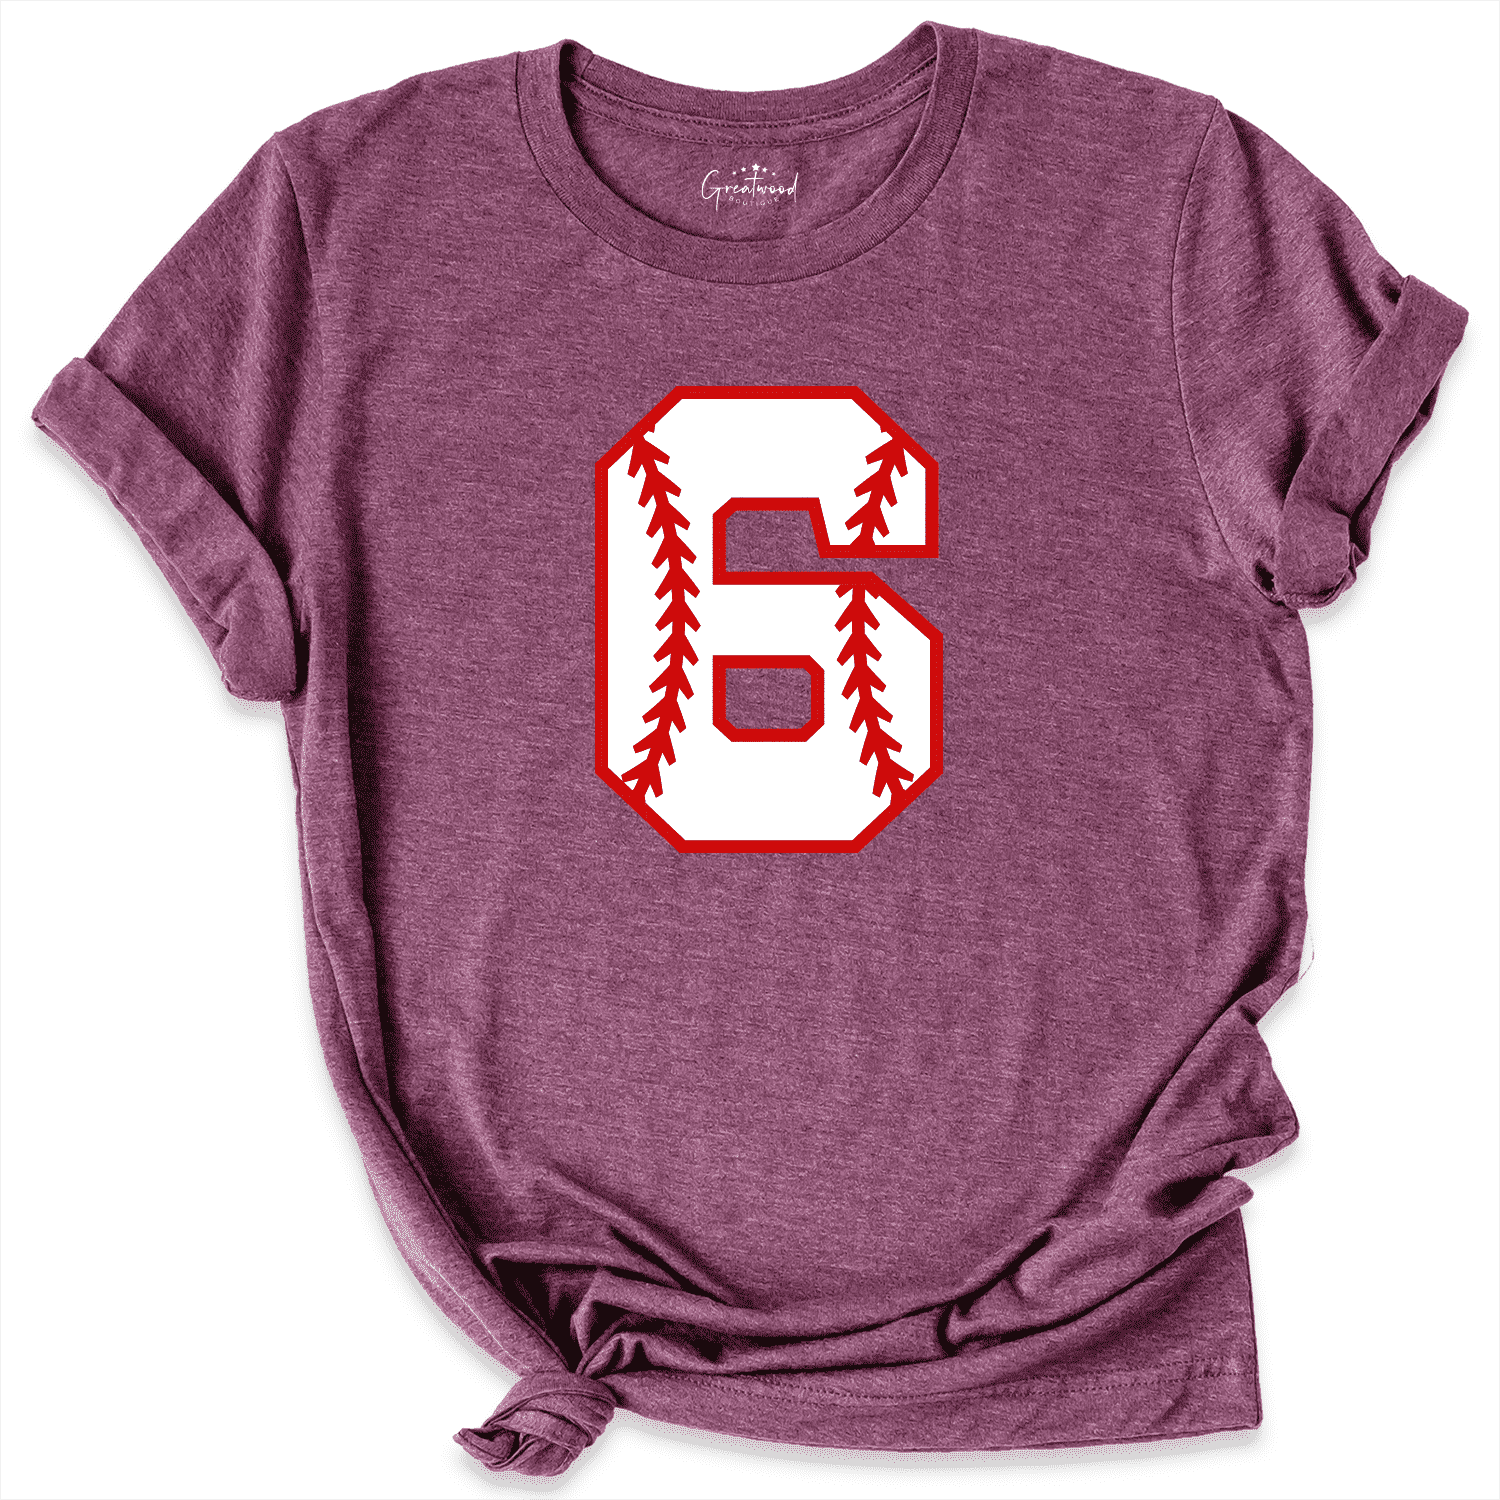 Softball  Numbers Shirt Maroon - Greatwood Boutique